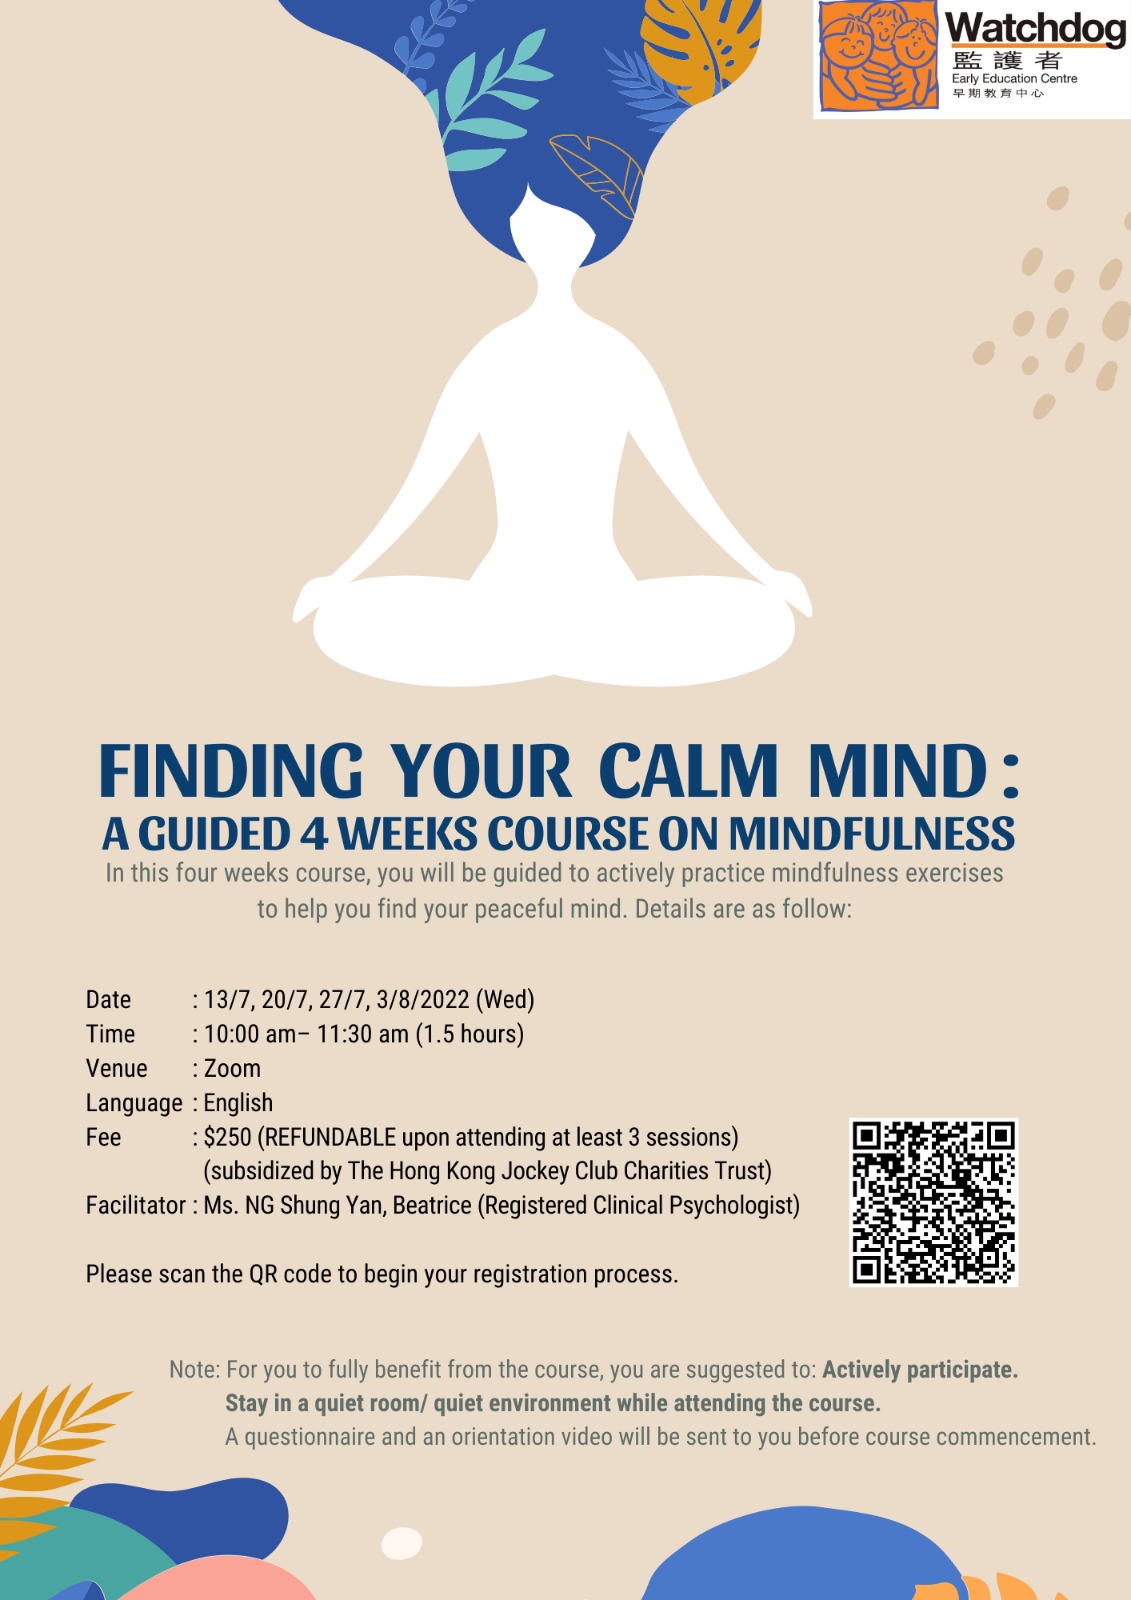 Finding your calm mind A guided 4 weeks course on mindfulness